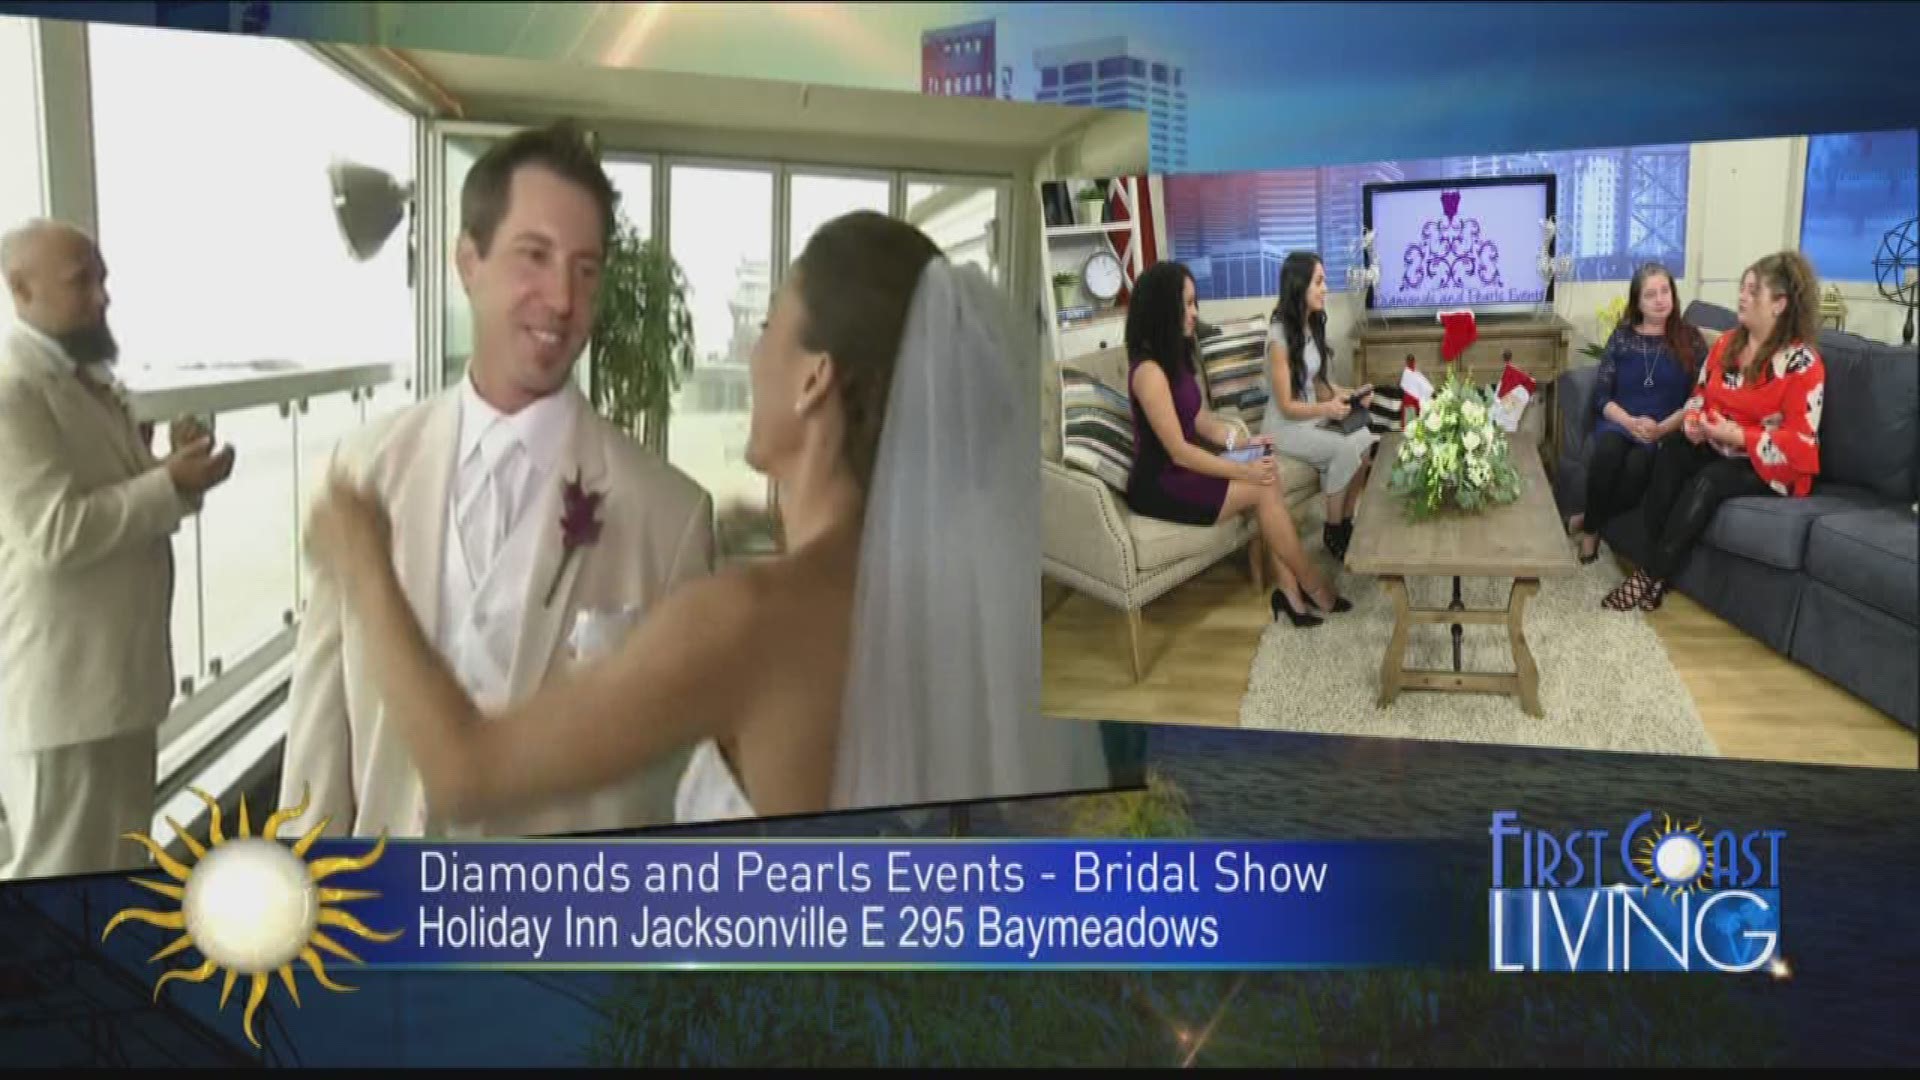 Wedding planning made easy with Holiday Inn and Diamonds and Pearls.